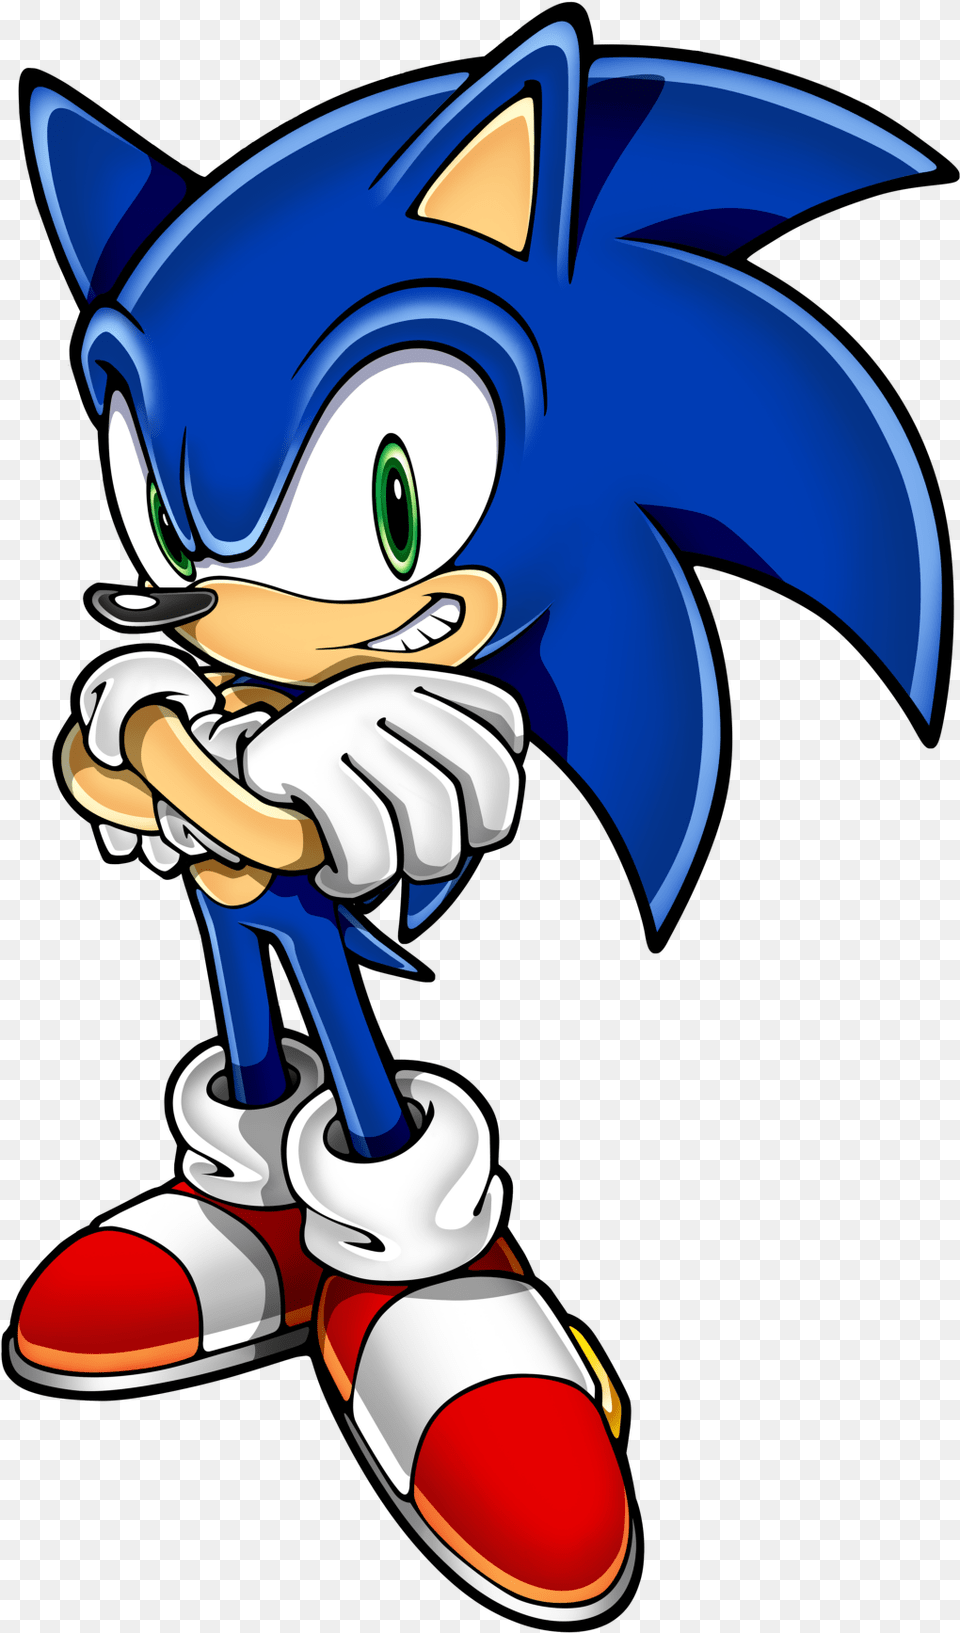 Sonic The Hedgehog 11 Sonic The Hedgehog Arms Crossed, Book, Comics, Publication, Clothing Png